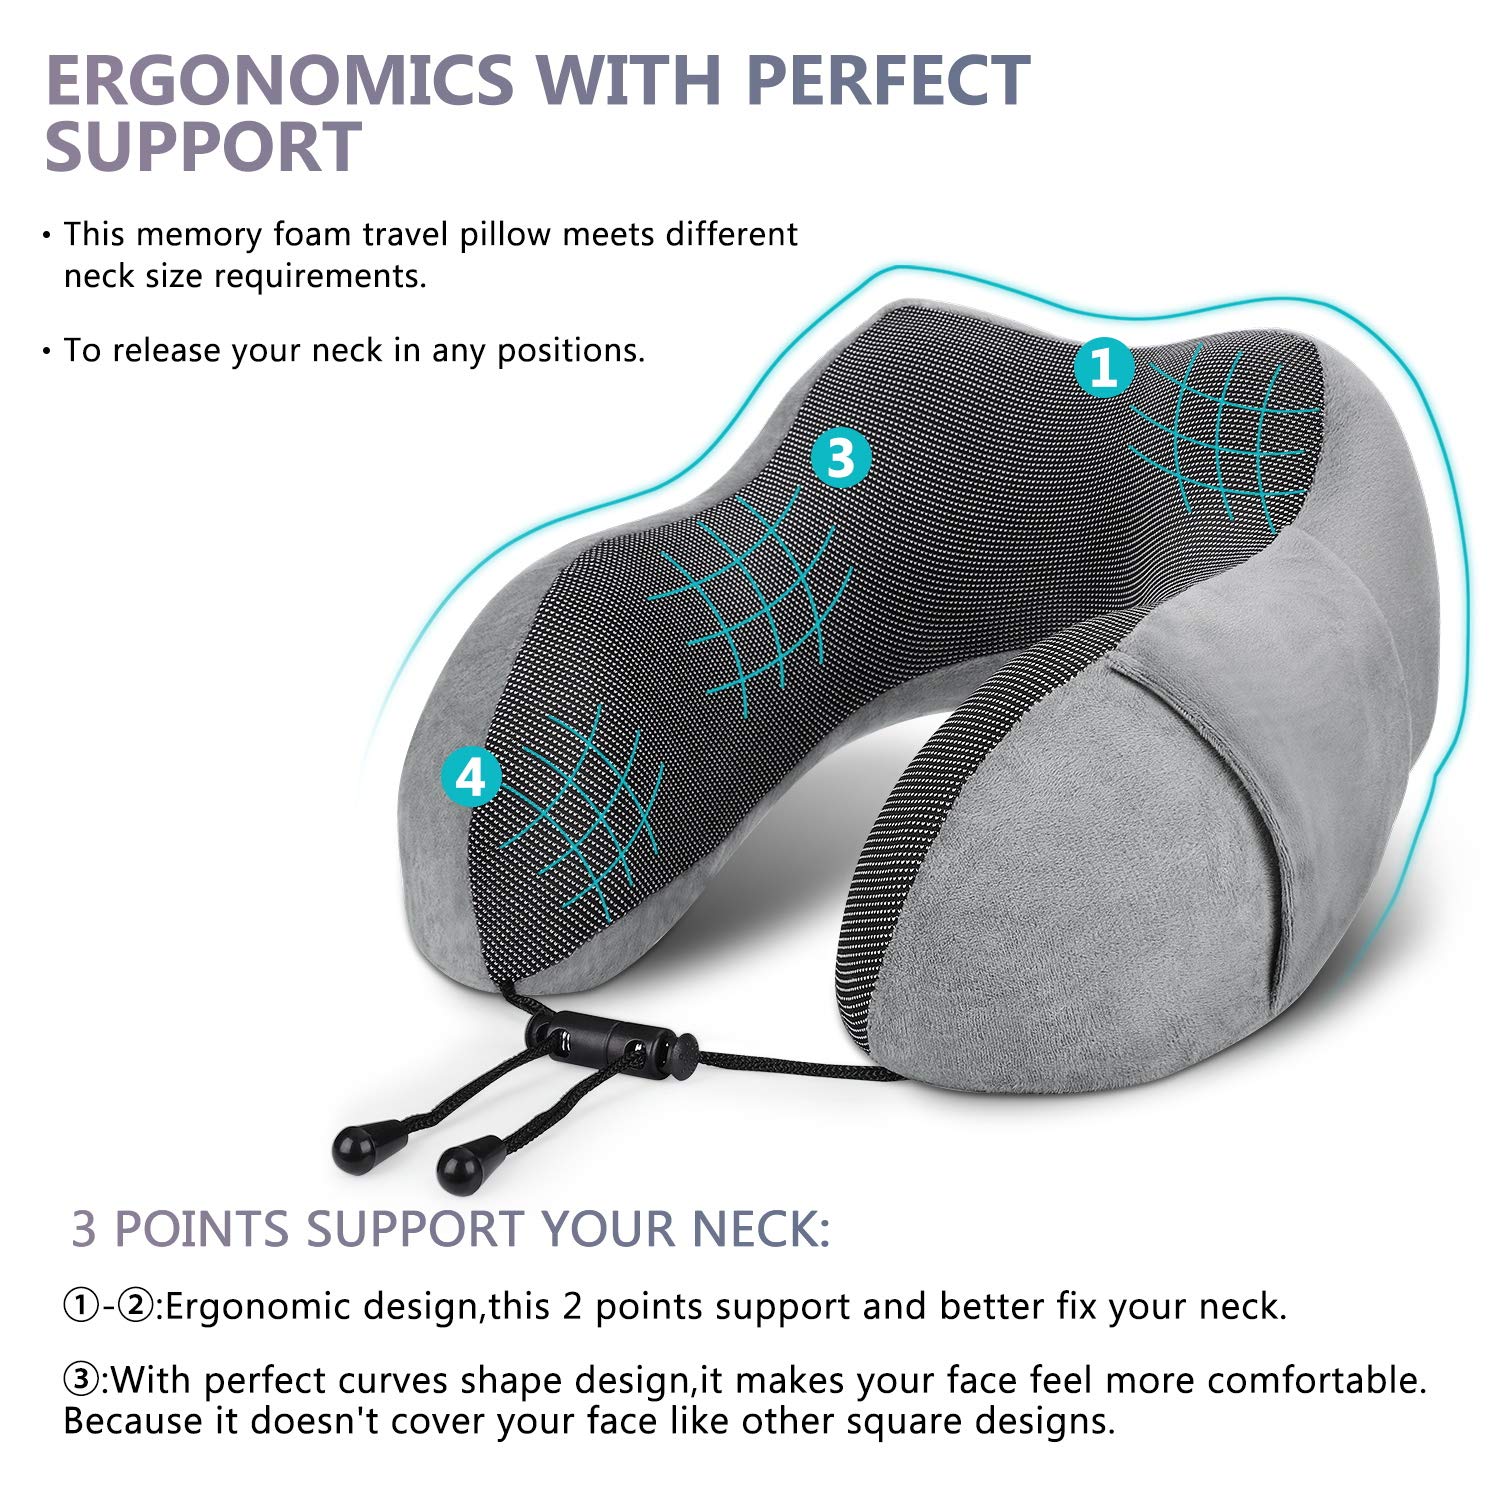 Travel Accessory 100/% Pure Memory Foam Pillow Hifye Memory Foam Travel Pillow Chin in Any Sitting Position Blue Neck Pillow for Pain Relief Sleeping Ideal for Men Women and Kids